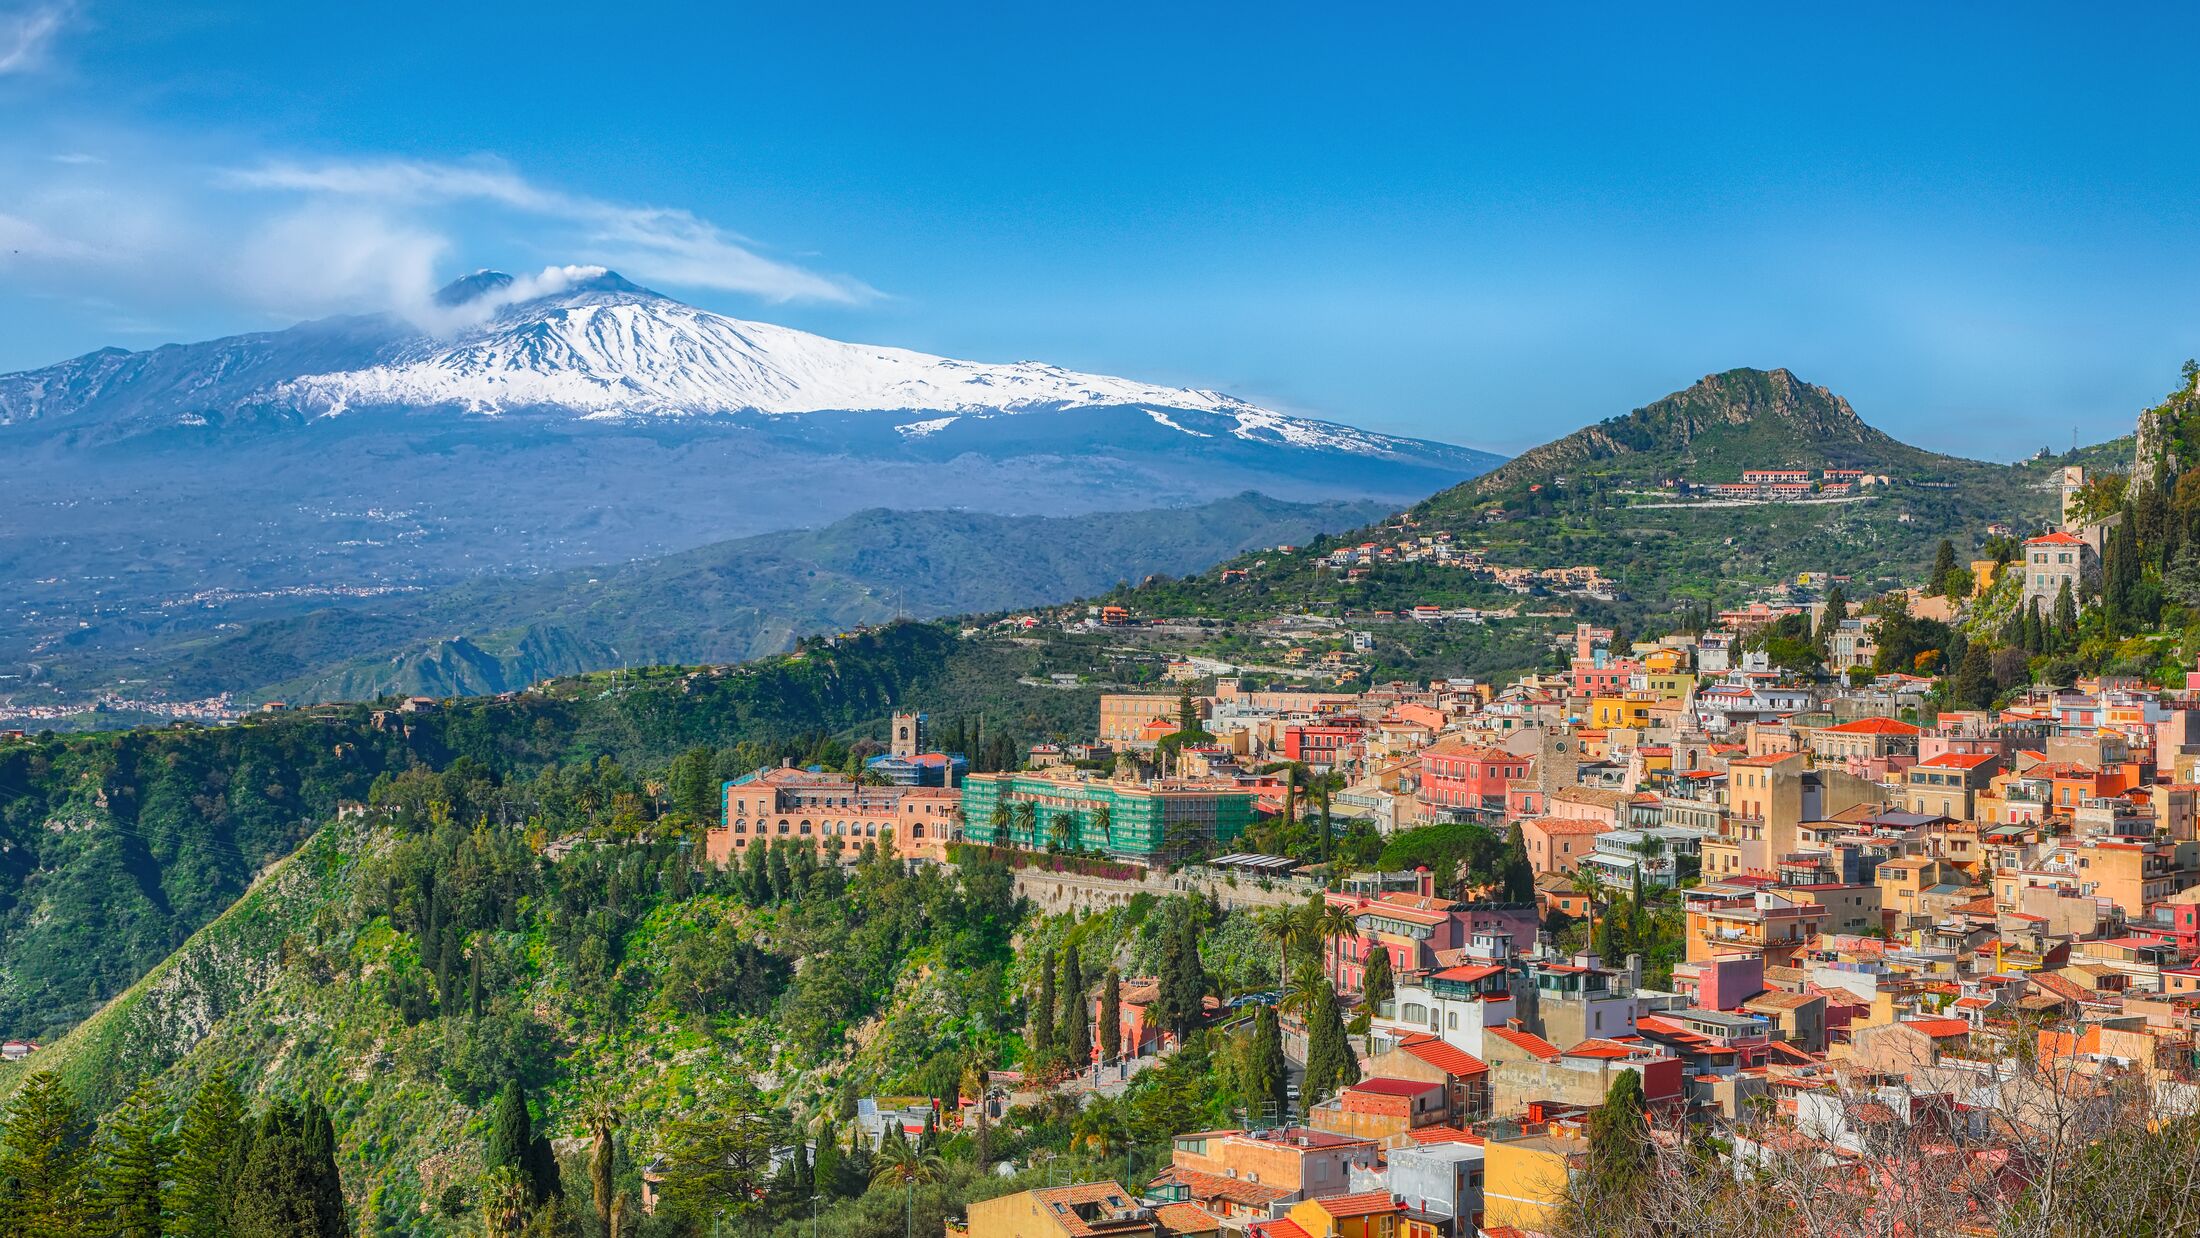 Etna volcano and Taormina town aerial panoramic view. Roofs of a lot of buldings. Smoking snow-capped Mount Etna volcano. Taormina, Sicily, Italy.